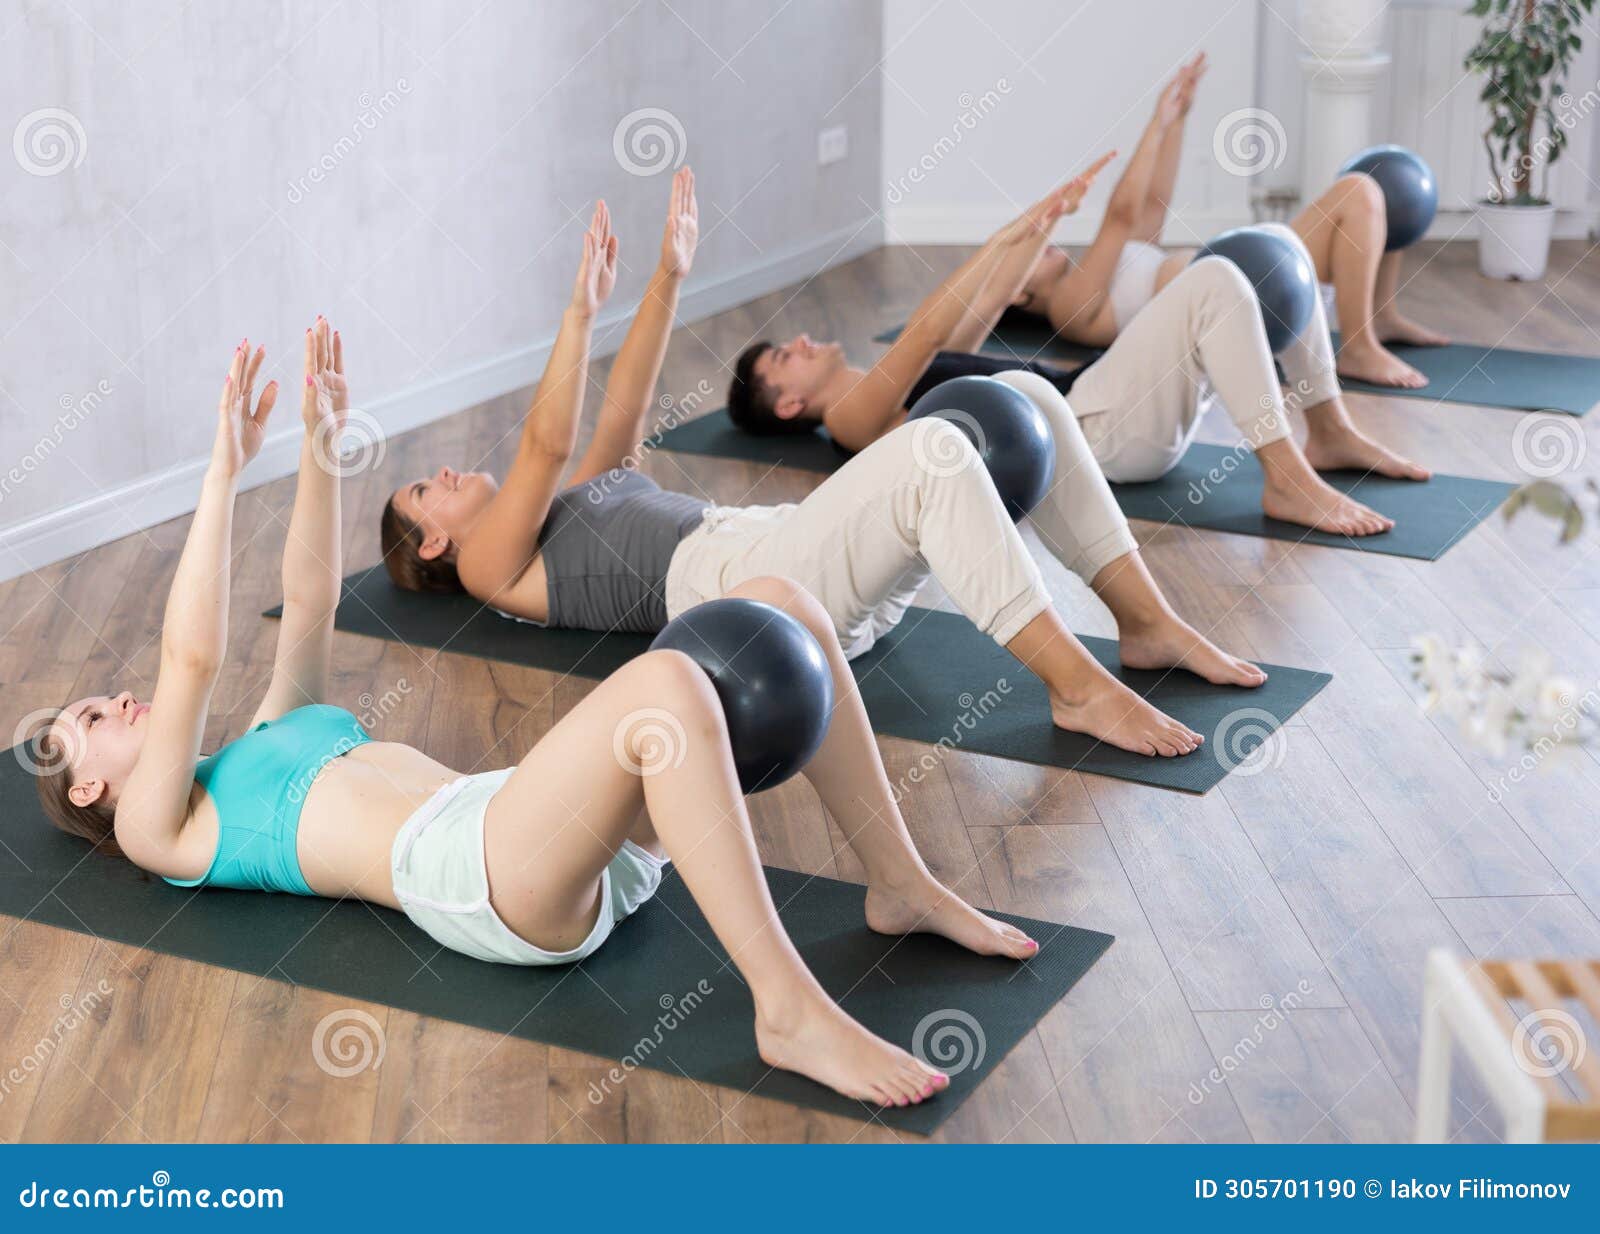 https://thumbs.dreamstime.com/z/young-girl-practicing-pilates-pose-softball-legs-training-area-slim-young-girl-practicing-pilates-softball-305701190.jpg